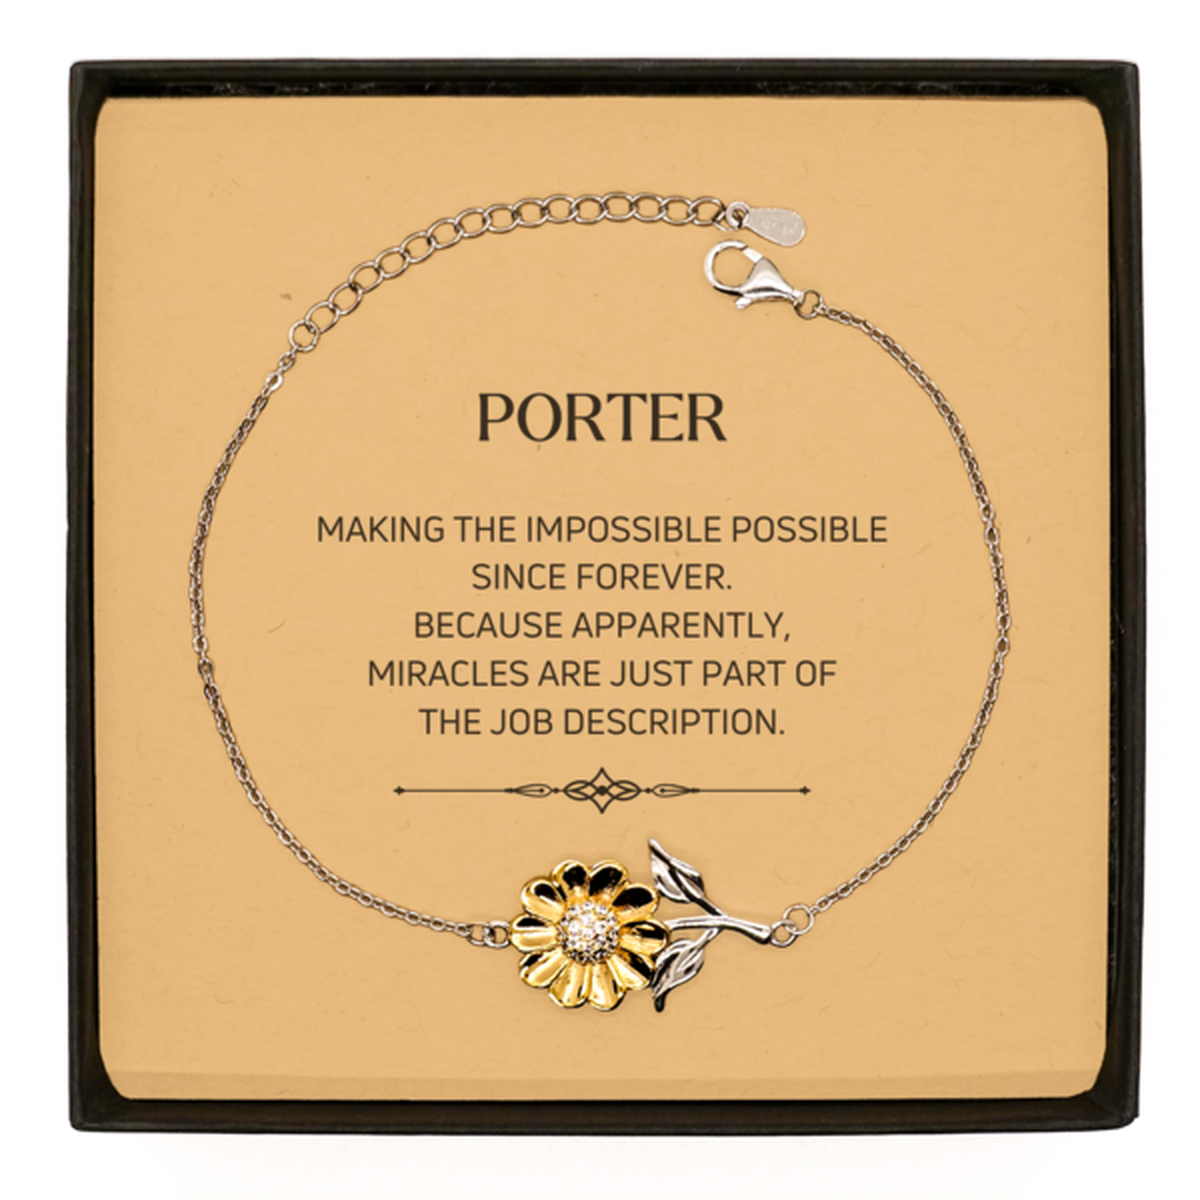 Funny Porter Gifts, Miracles are just part of the job description, Inspirational Birthday Sunflower Bracelet For Porter, Men, Women, Coworkers, Friends, Boss